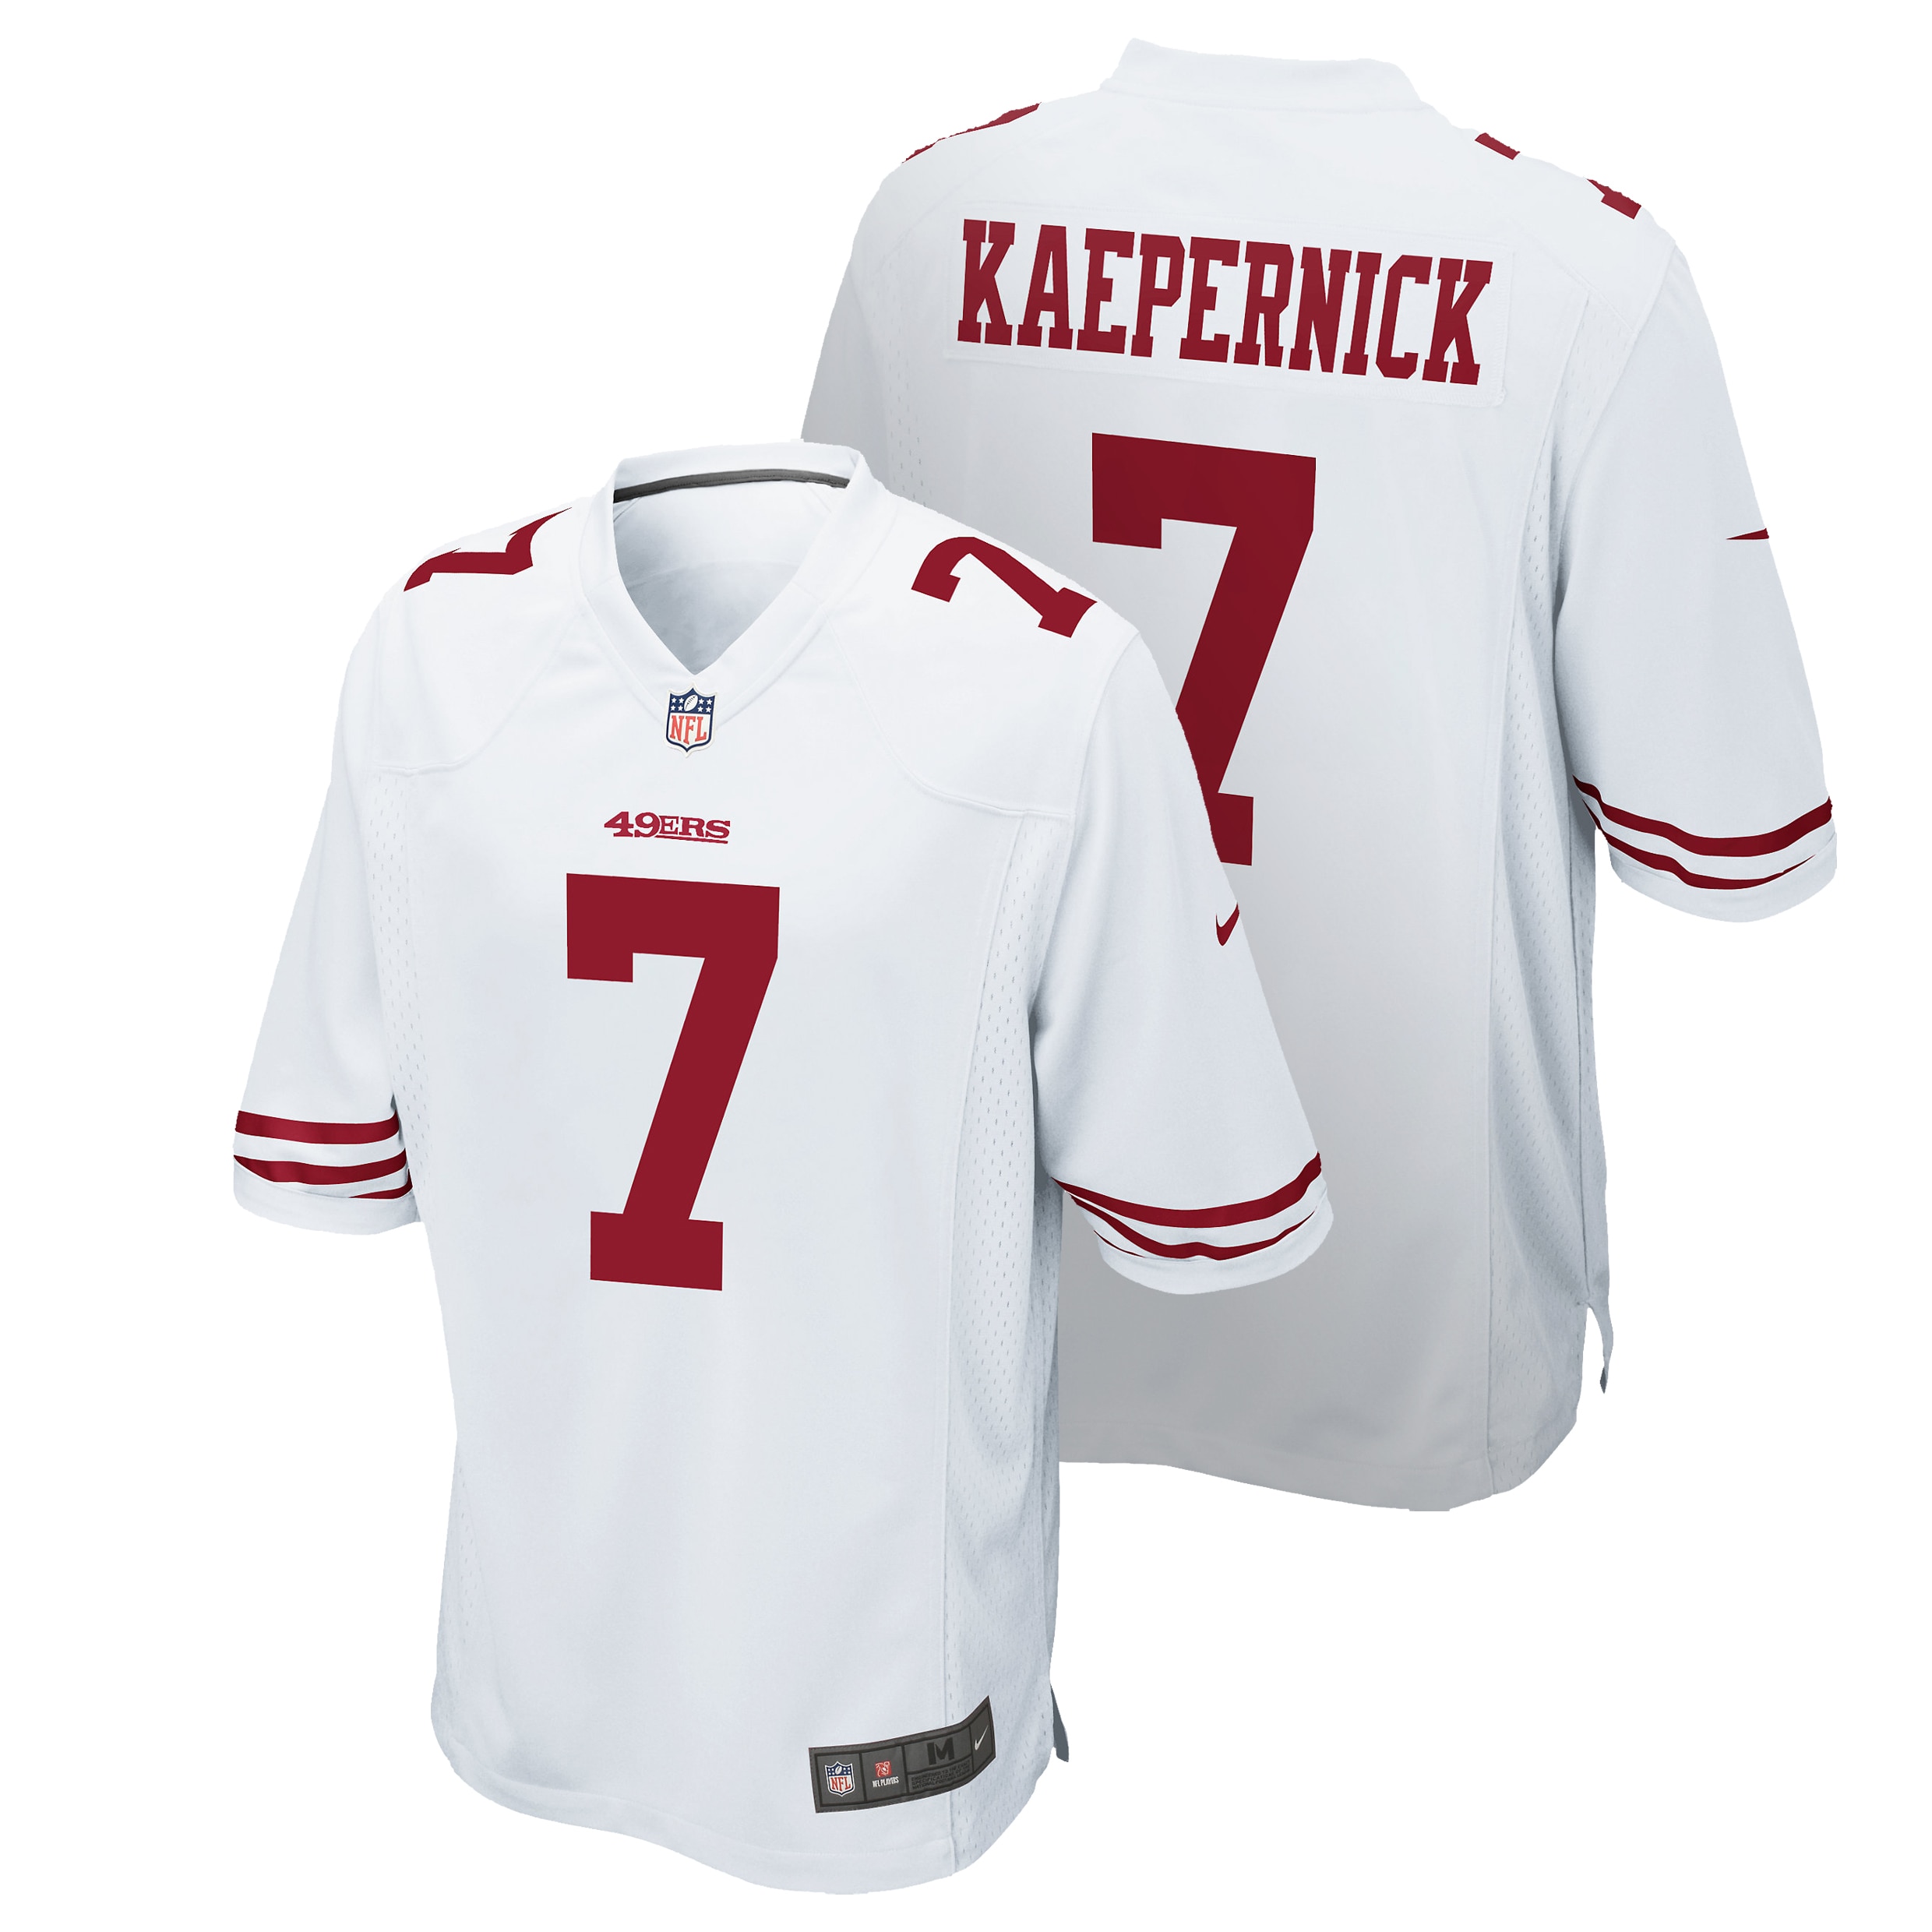 San Francisco 49ers Road Game Jersey 